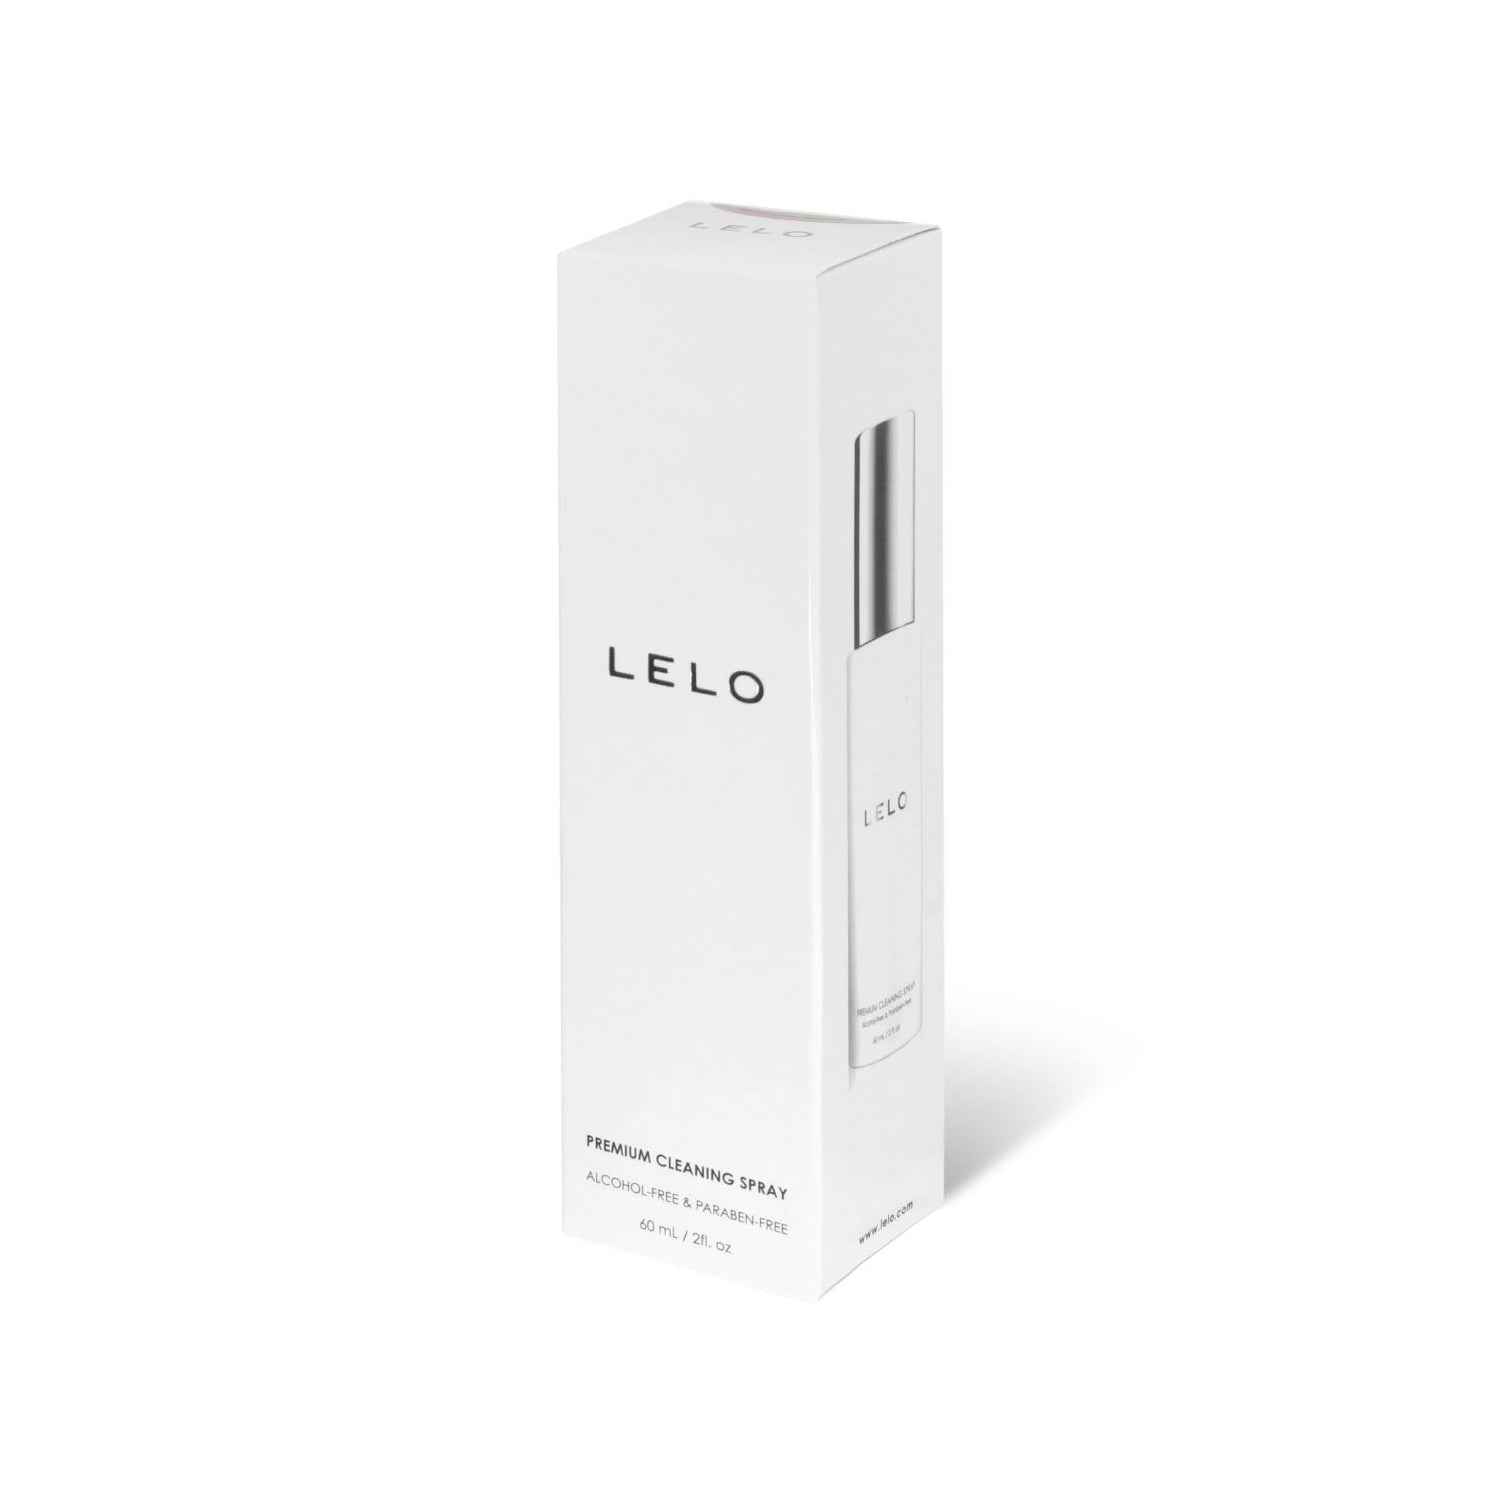 LELO (Toy) Cleaning Spray 60ml | Limpiador Juguetes by Lelo - Lelo - LELO (Toy) Cleaning Spray 60ml | Limpiador Juguetes by Lelo - LUST TOYS